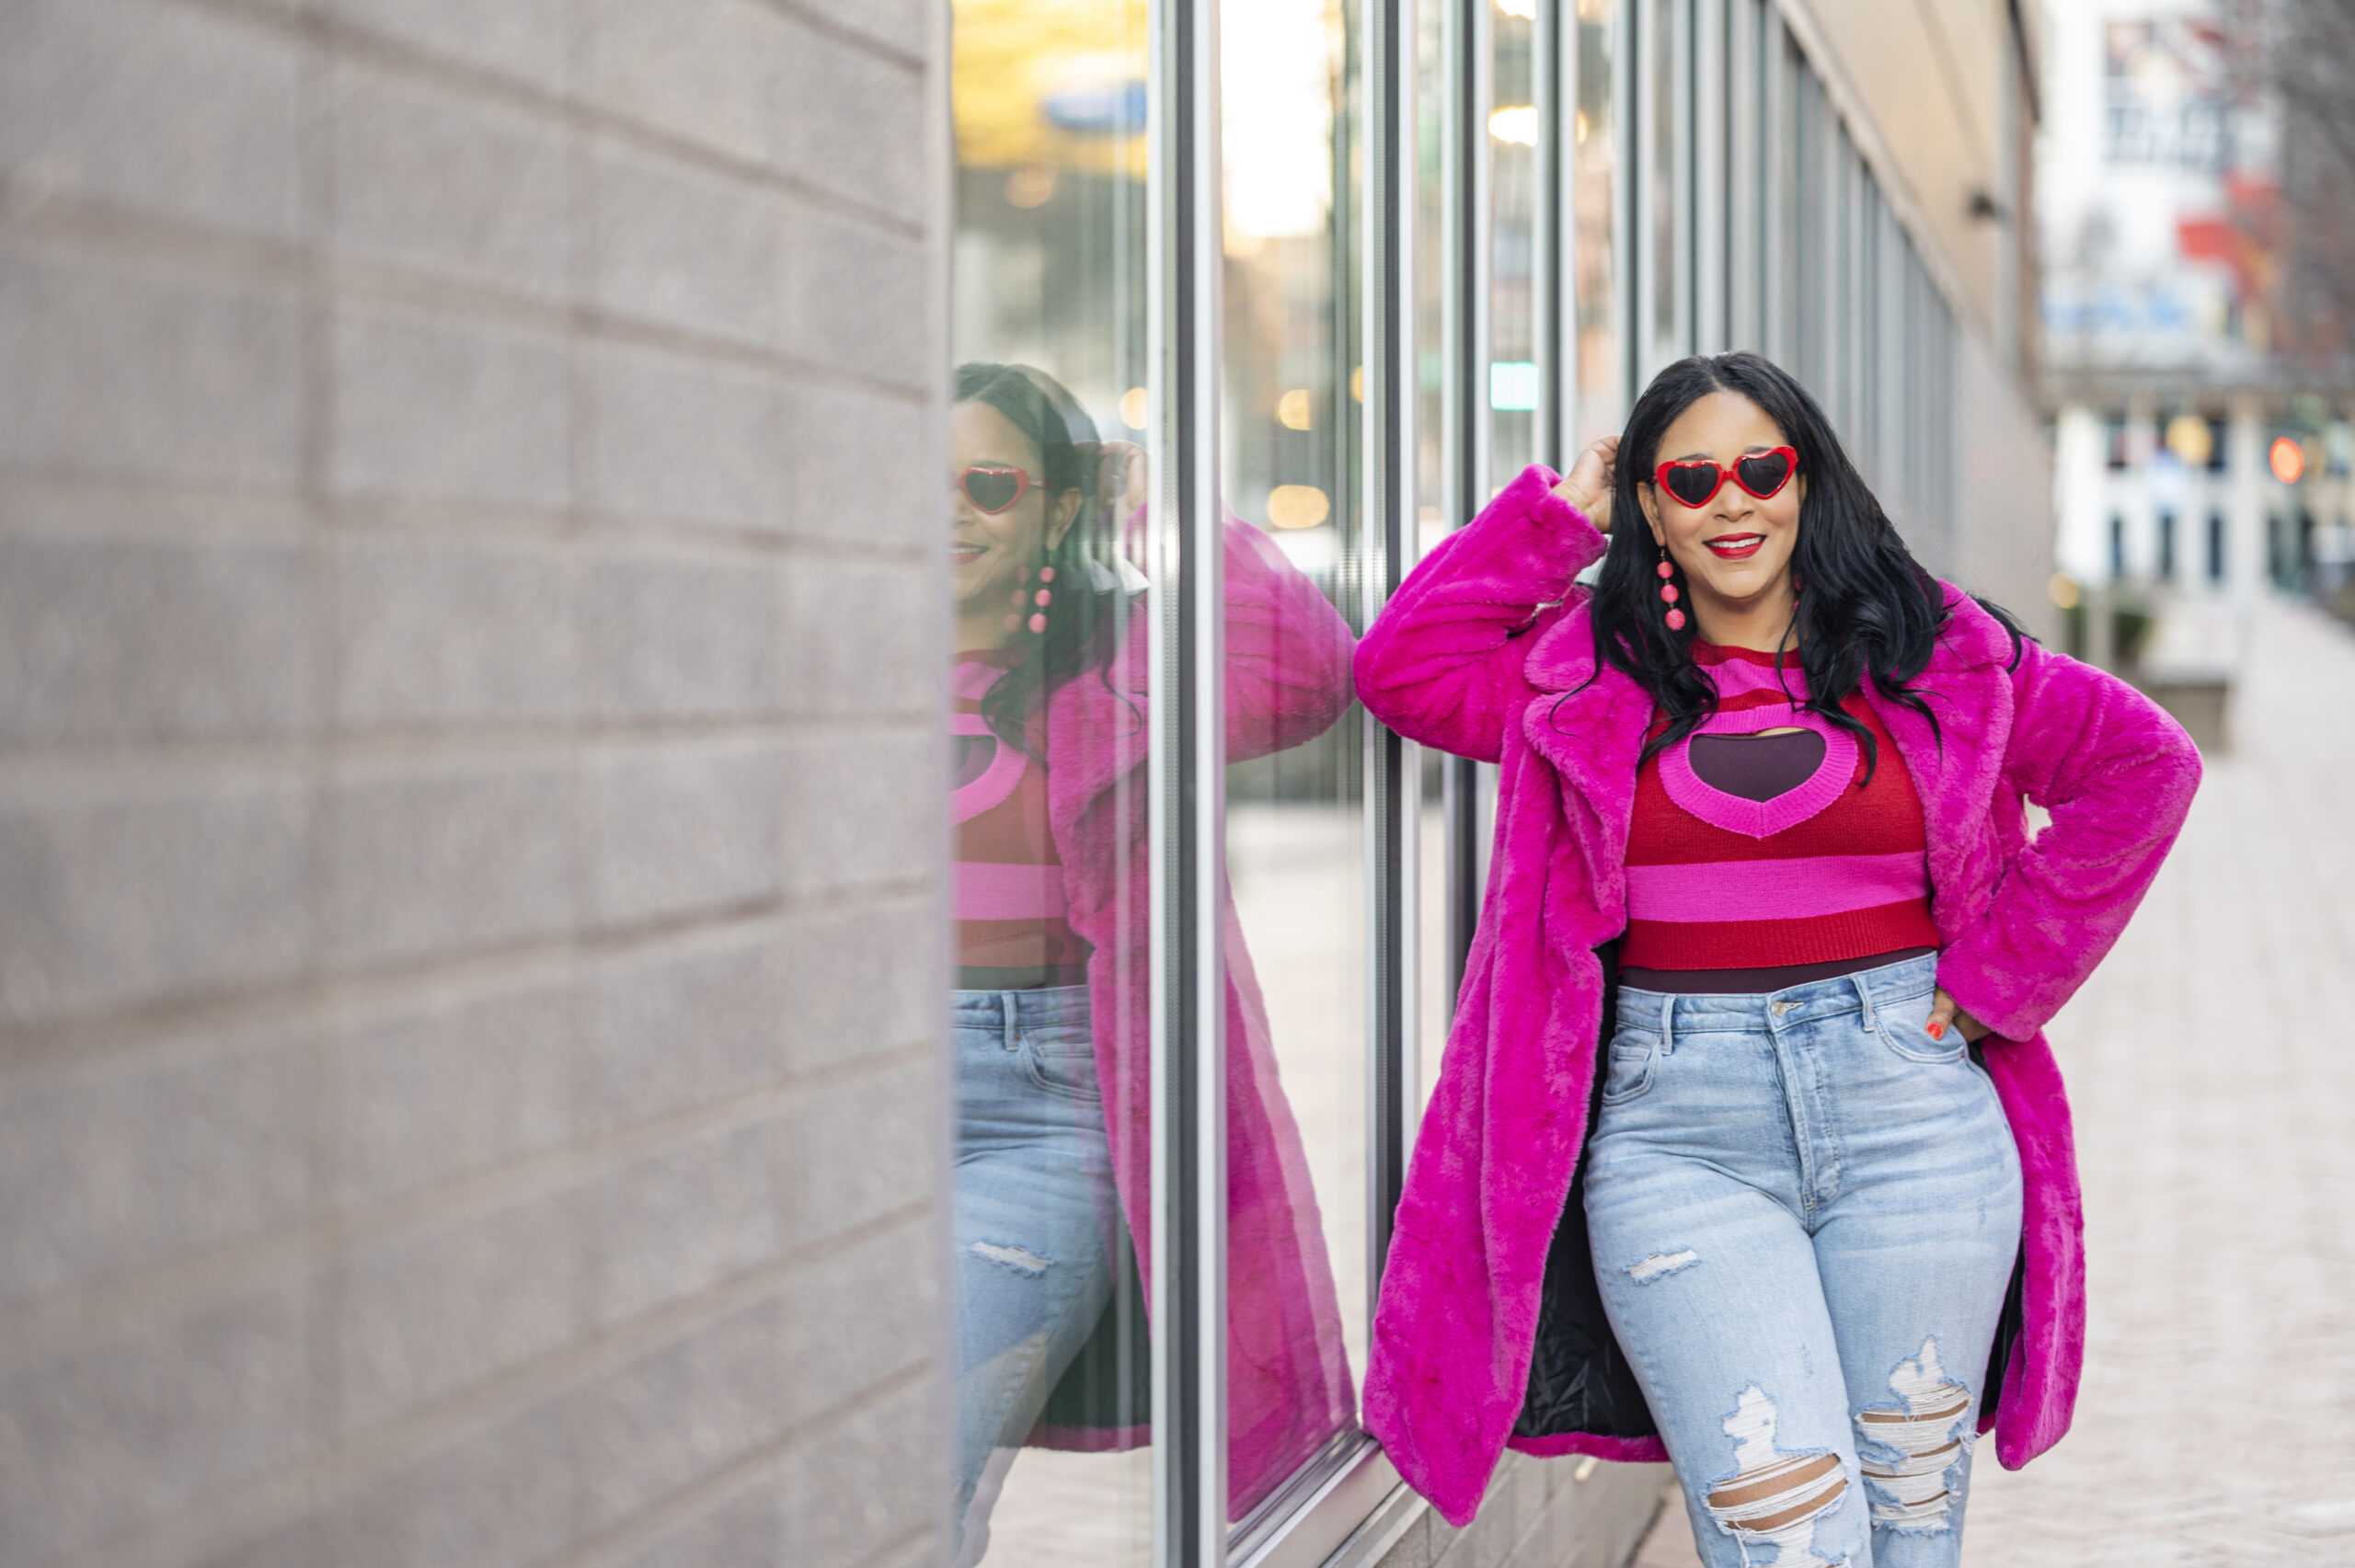 Happy Hearts Day and Happy Valentine's Day - What I'm Wearing: Heart Sunglasses, Faux Fur Coat, Cut Out Heart Pattern Colorblock Drop Shoulder Sweater, High Waisted Mom Jeans, Faux Patent Leather Zip-Up Block Heel Booties